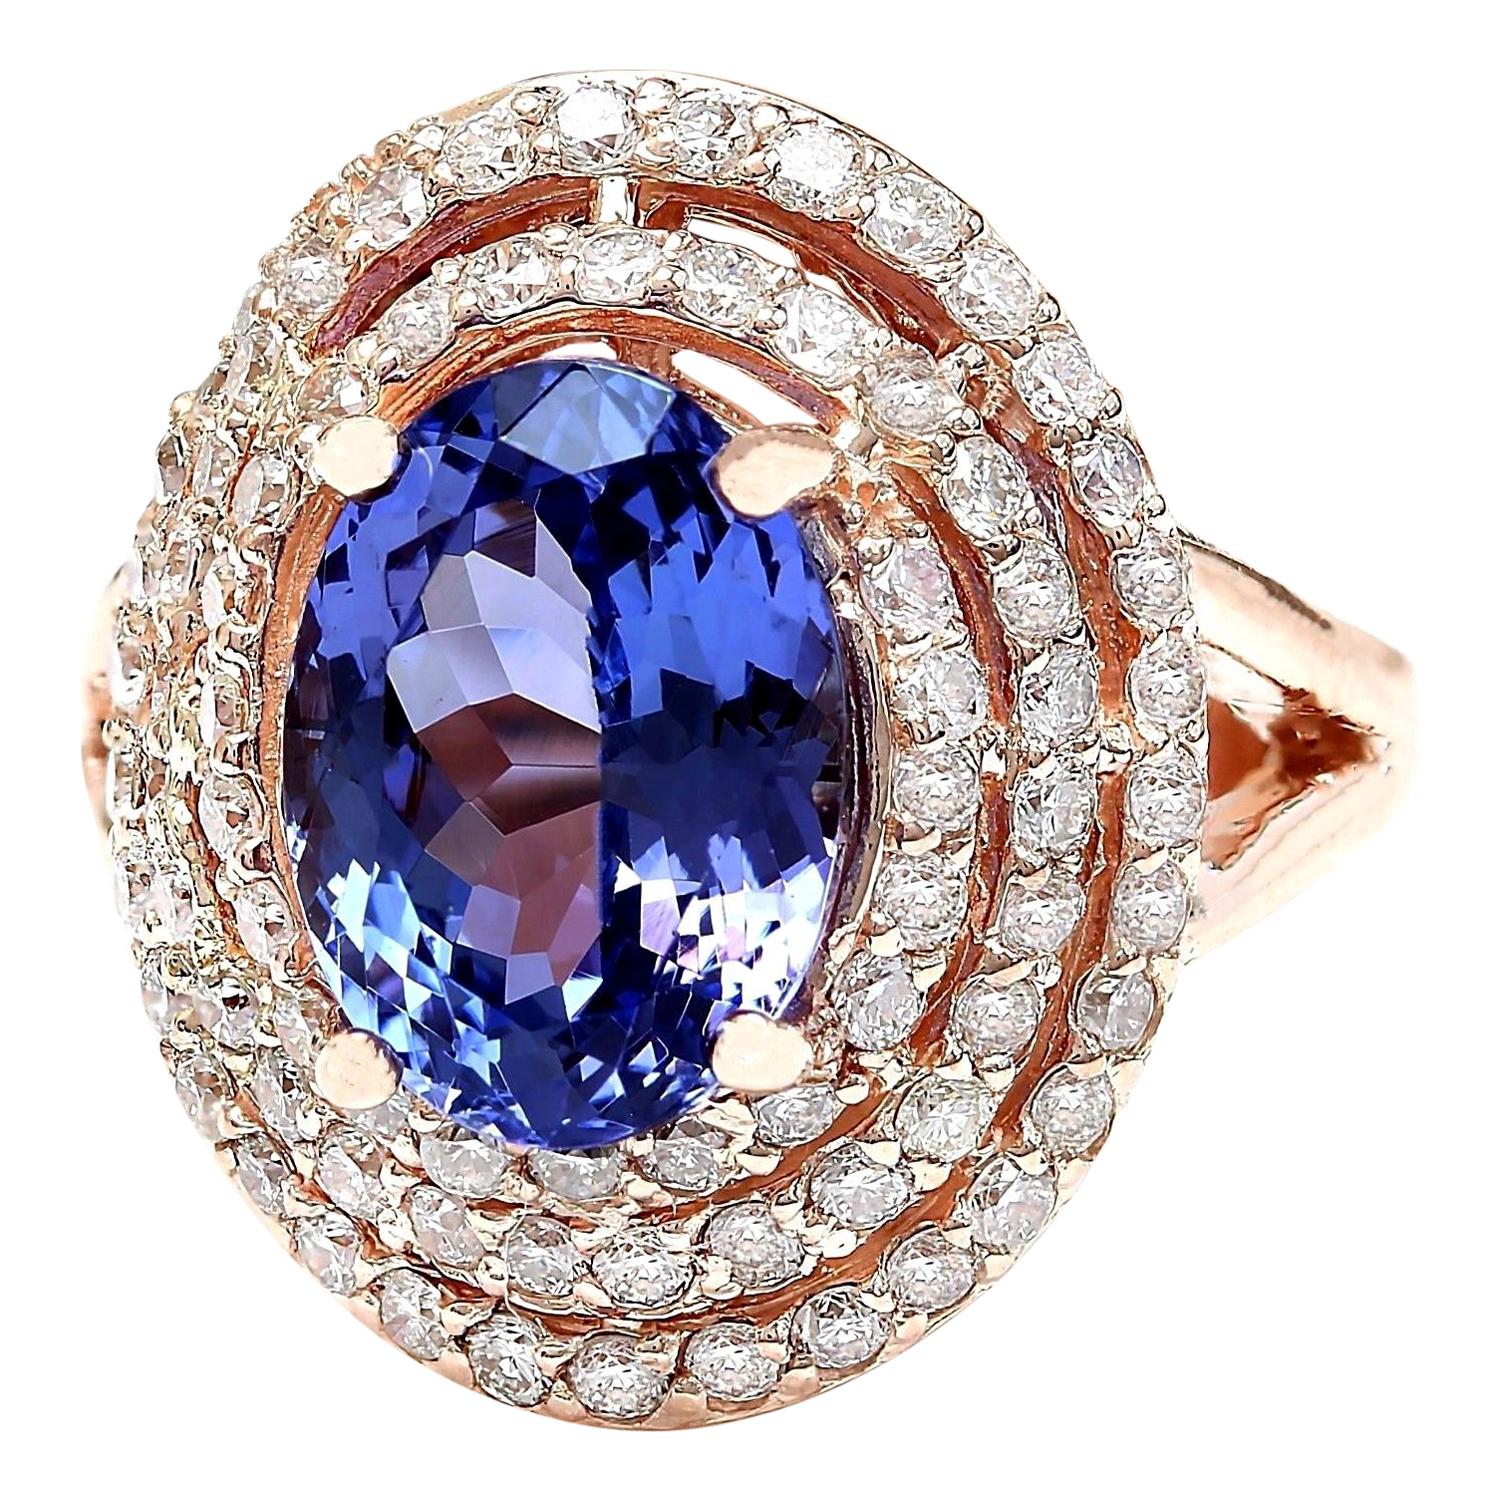 5.33 Carat Natural Tanzanite 14K Solid Rose Gold Diamond Ring
 Item Type: Ring
 Item Style: Cocktail
 Material: 14K Rose Gold
 Mainstone: Tanzanite
 Stone Color: Blue
 Stone Weight: 3.83 Carat
 Stone Shape: Oval
 Stone Quantity: 1
 Stone Dimensions: